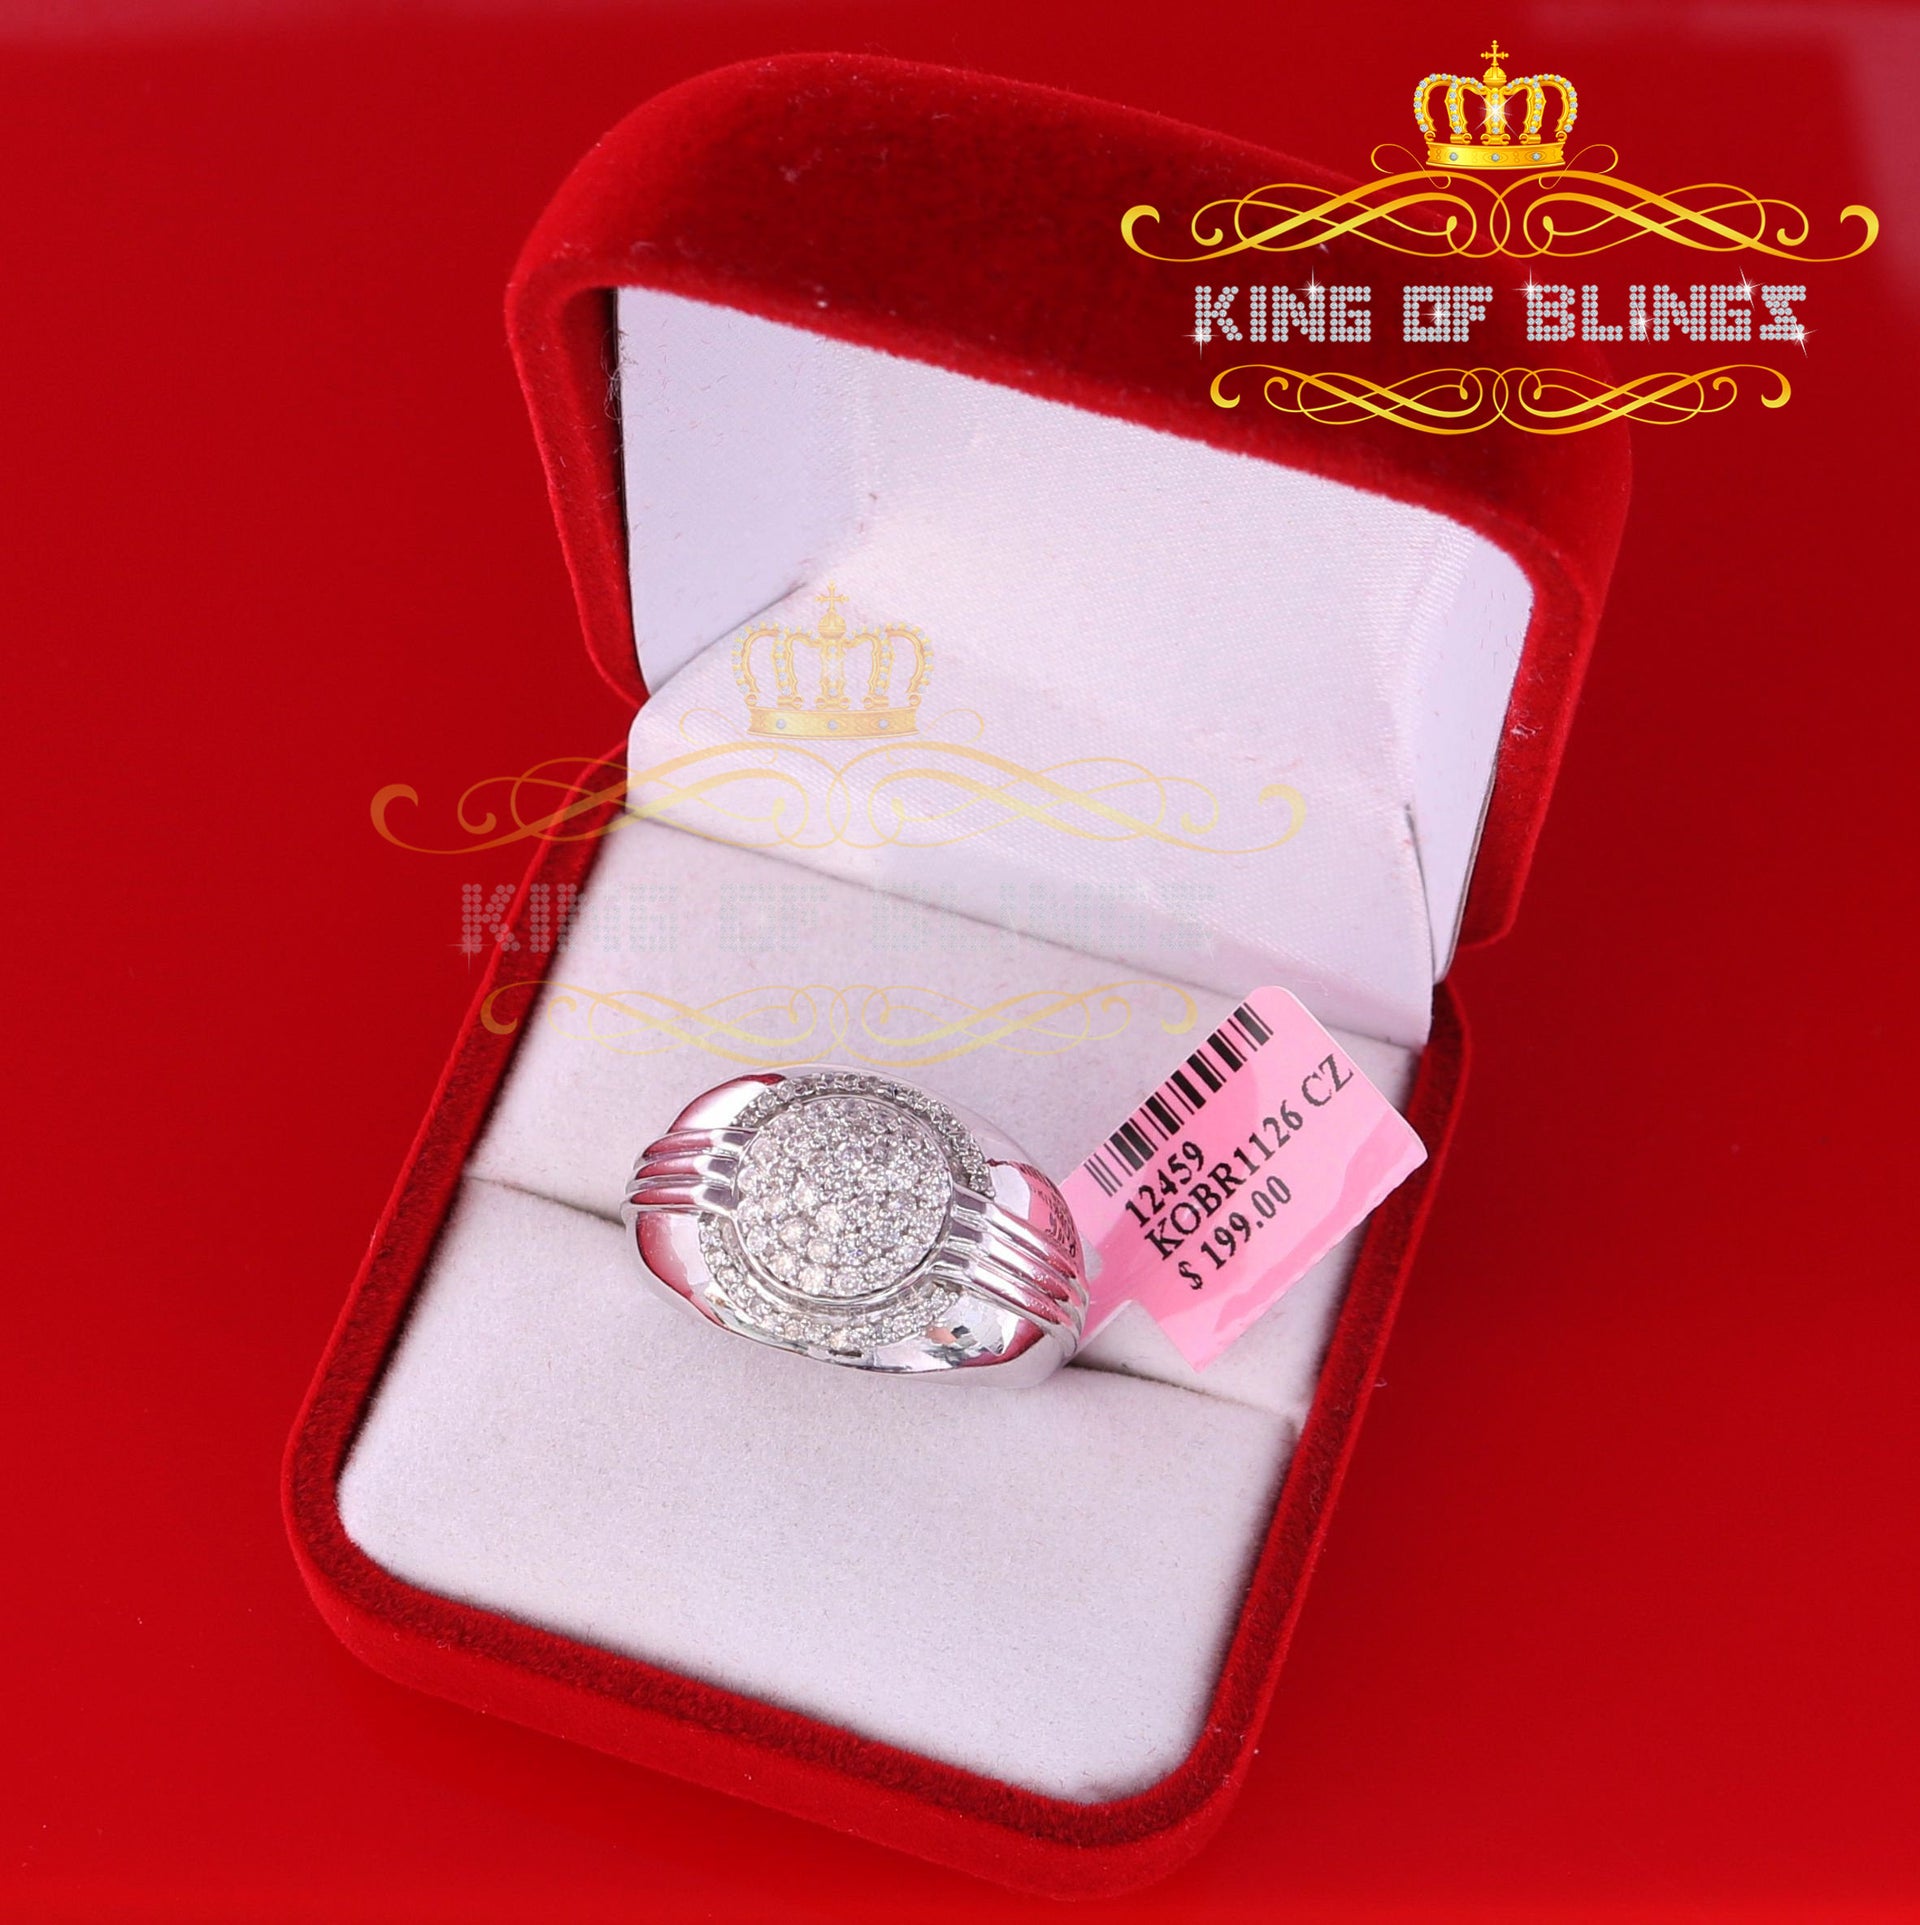 King Of Bling'sSterling Silver White 0.65ct Cubic Zirconia Round Wide Band Men's Ring Size 9.5 KING OF BLINGS